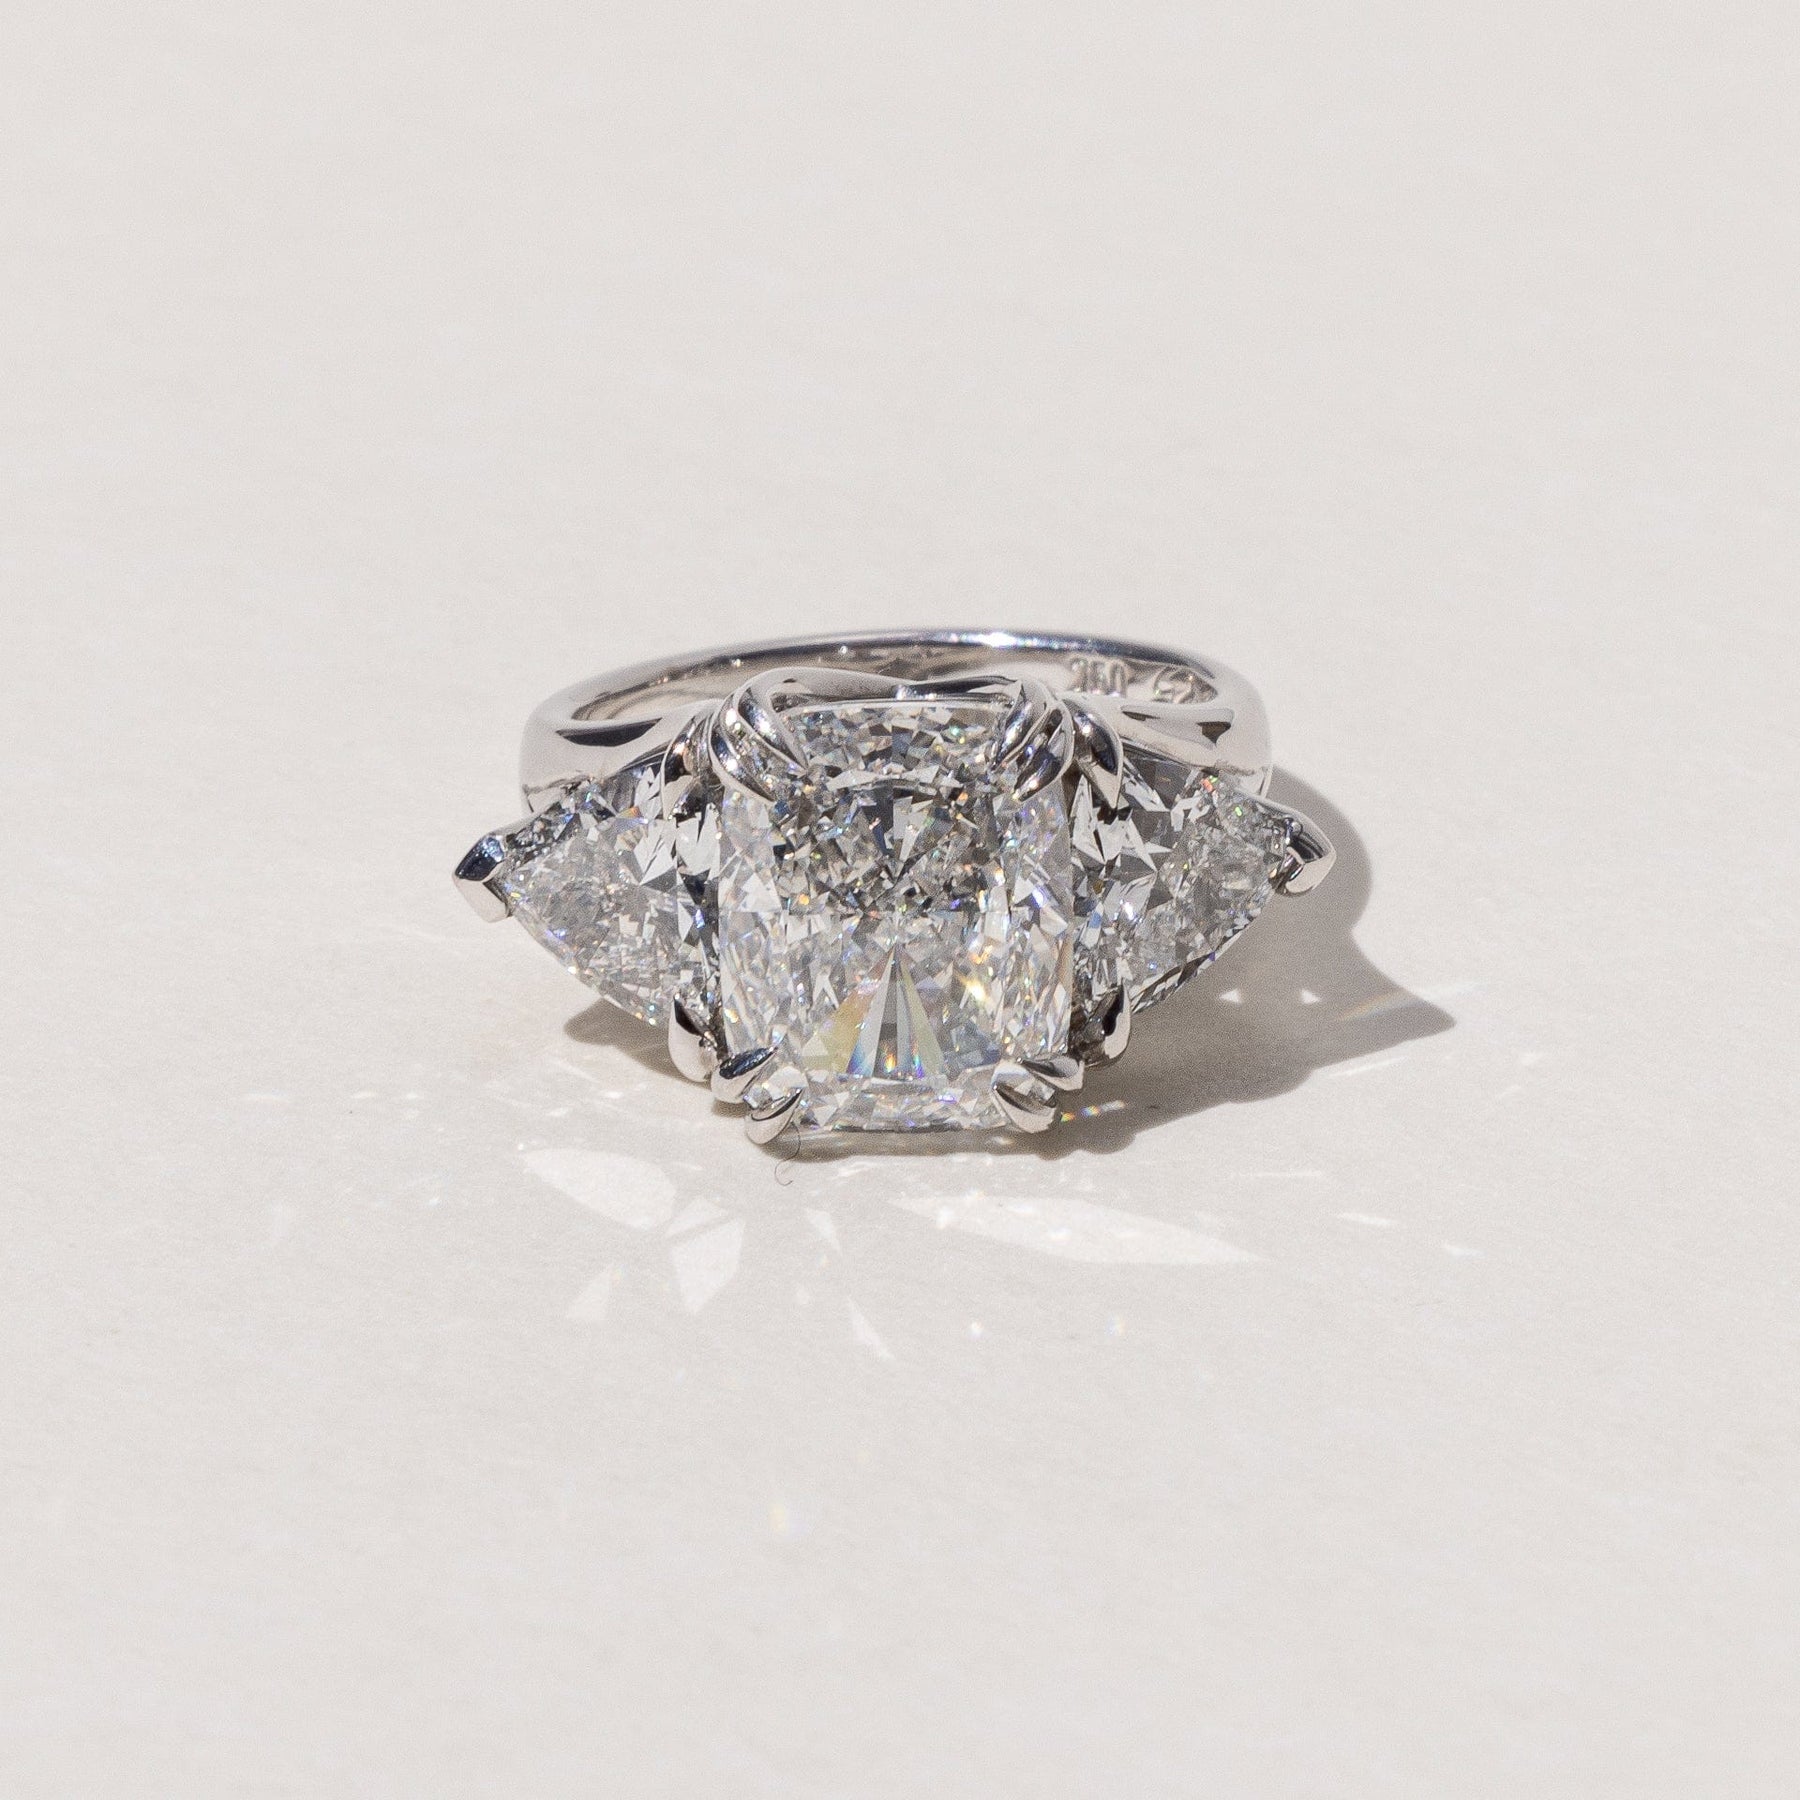 Custom Design 5ct Diamond Engagement Ring in White Gold handcrafted by our Master Jeweller 